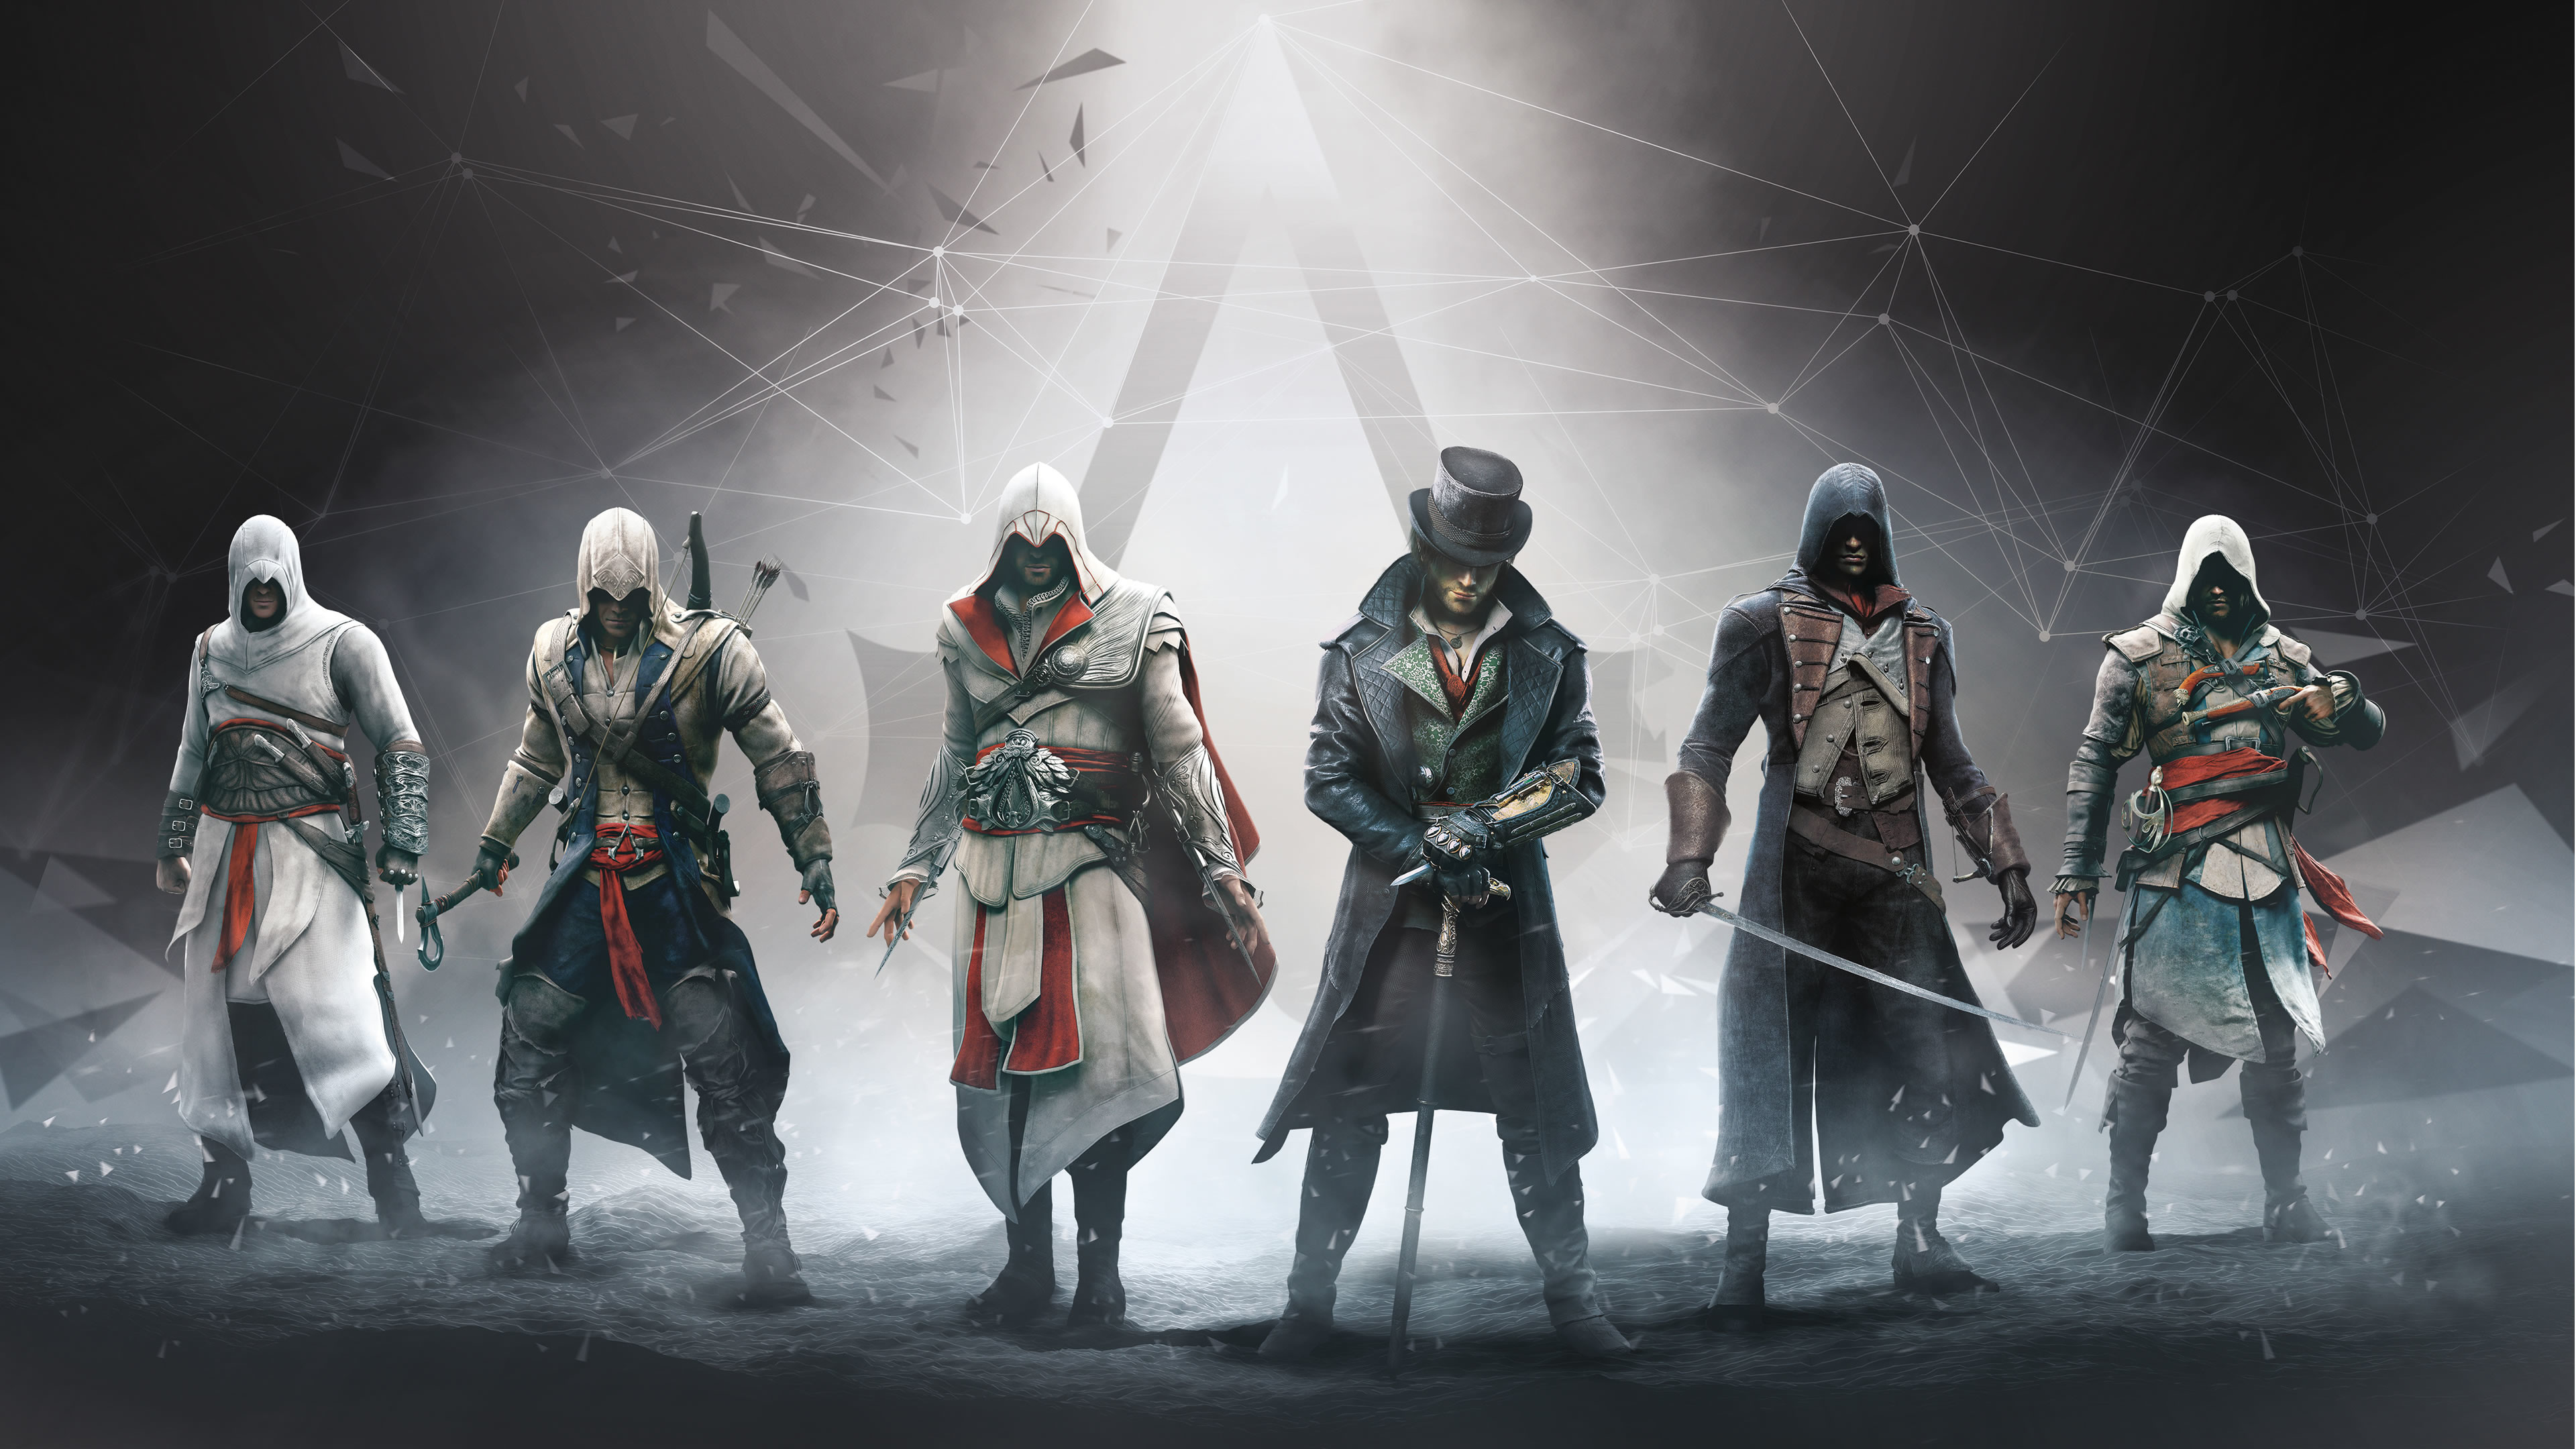 3840x2160 1066 Assassin's Creed HD Wallpapers | Backgrounds - Wallpaper Abyss